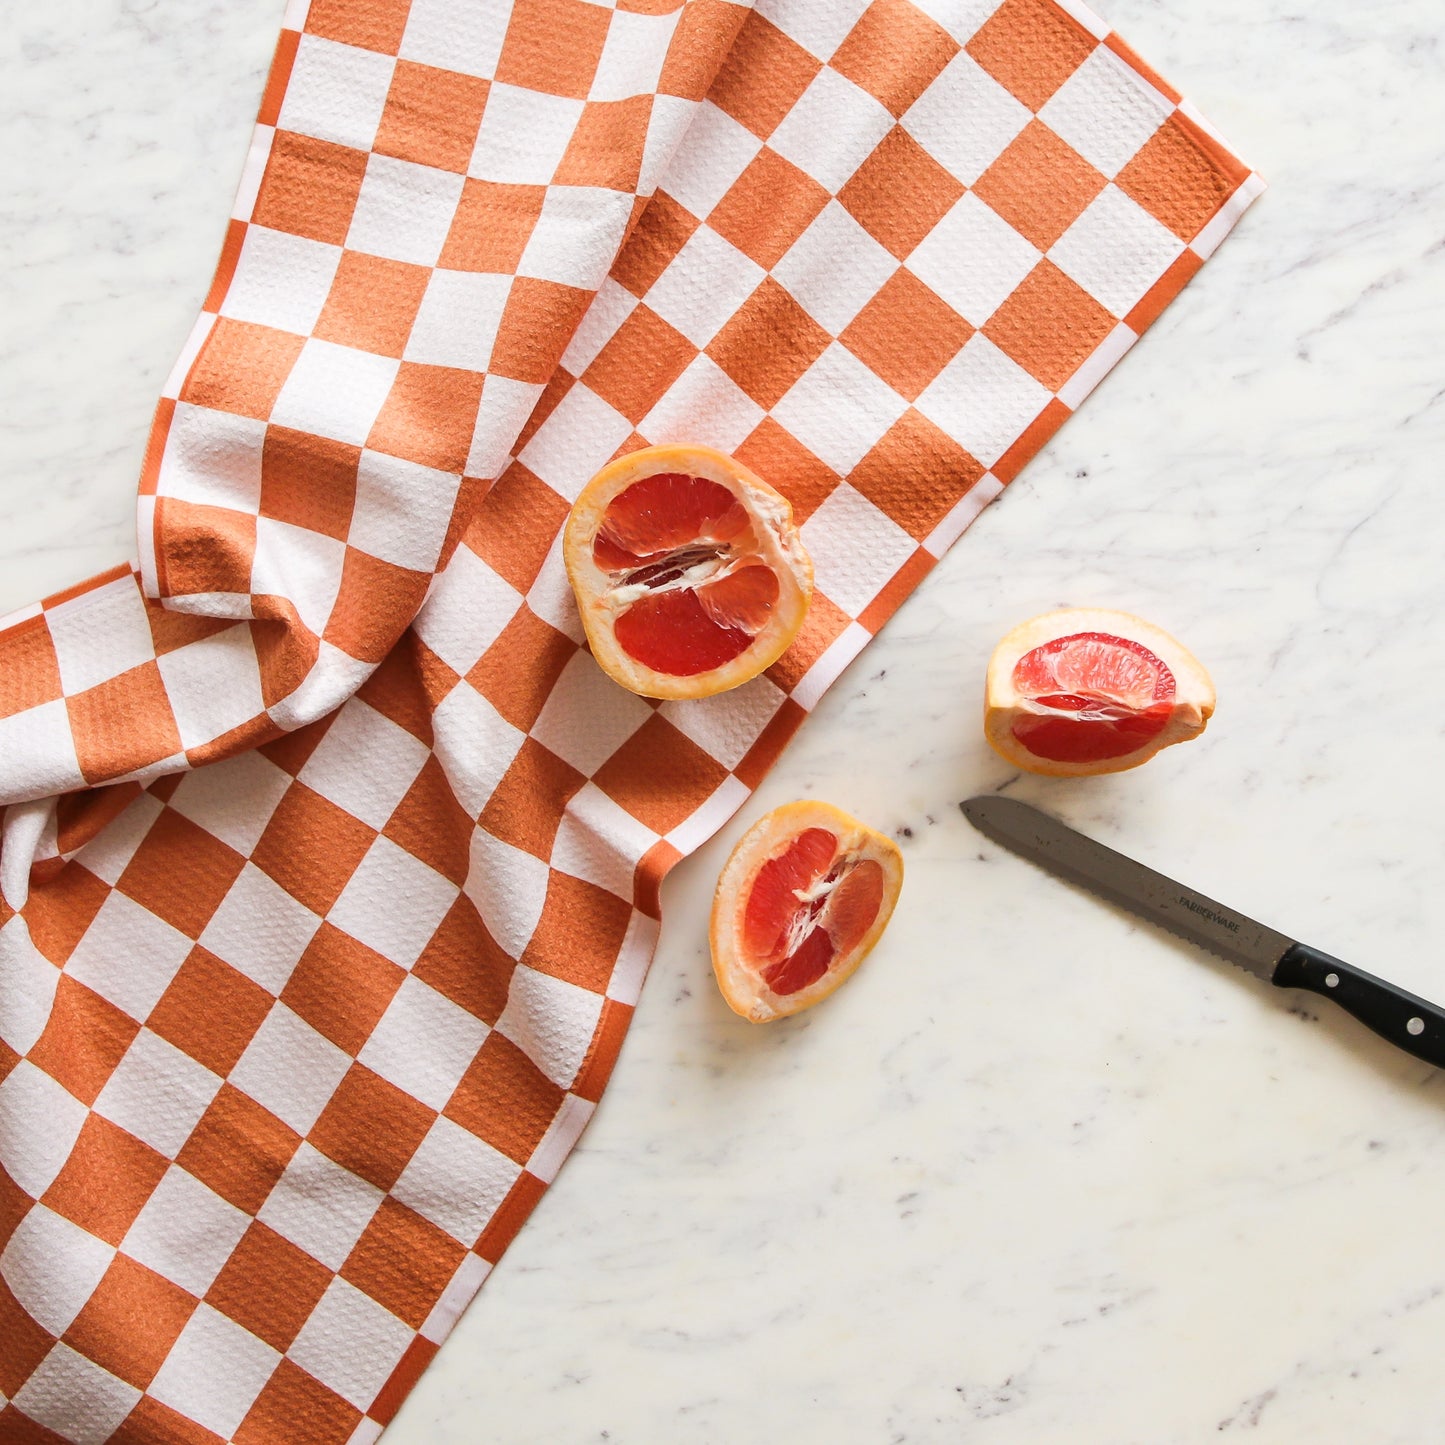 On a marble backdrop is an orange and ivory checkered kitchen towel with a staged blood orange cut up next to it.